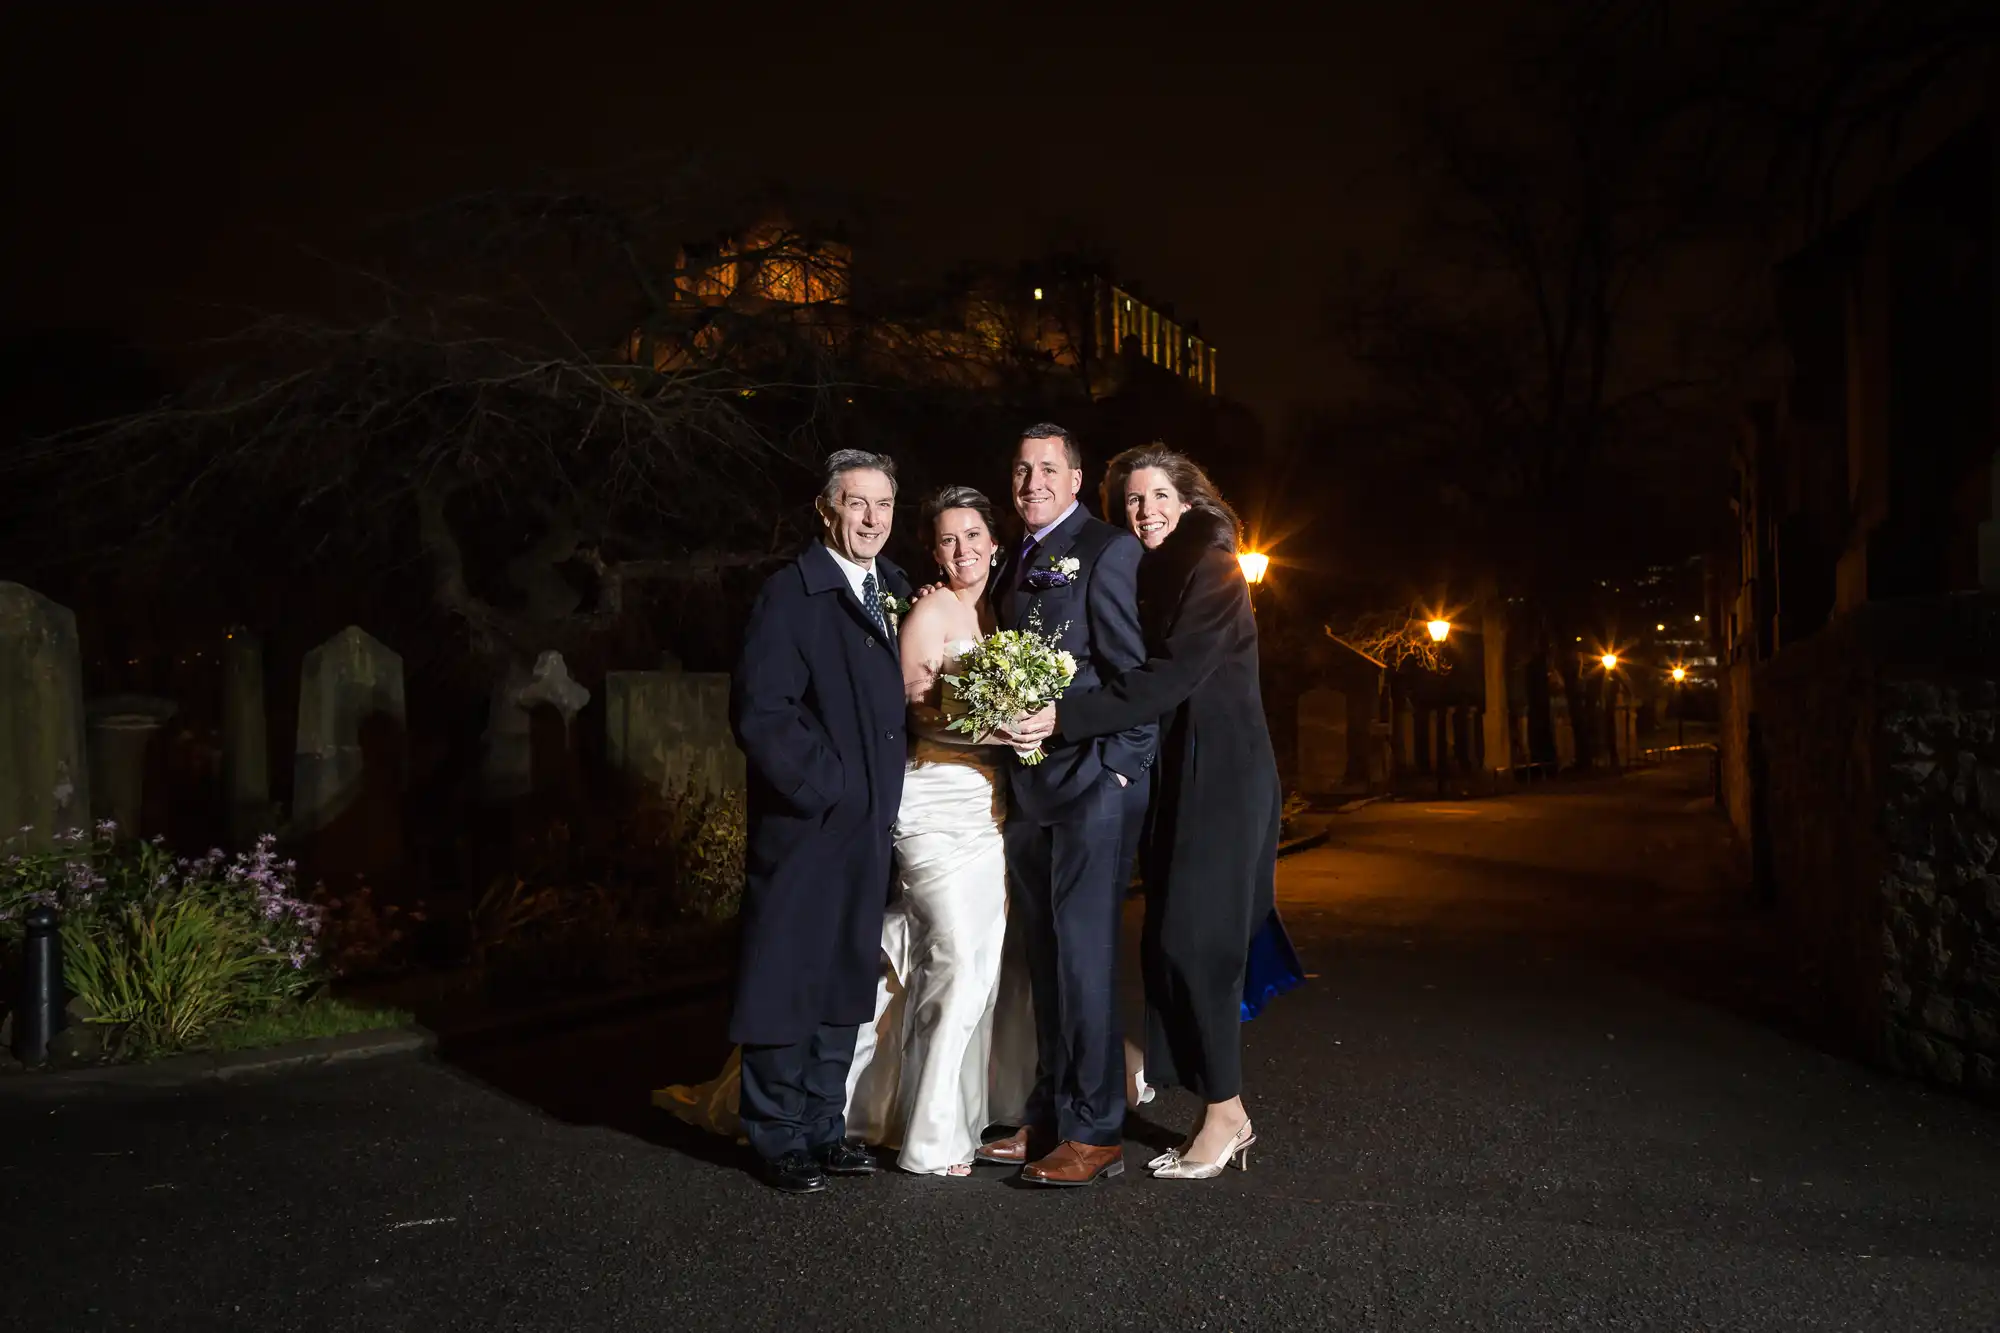 Four people dressed in formal attire posing for a photo at night on a street, with a dimly lit building and trees in the background.